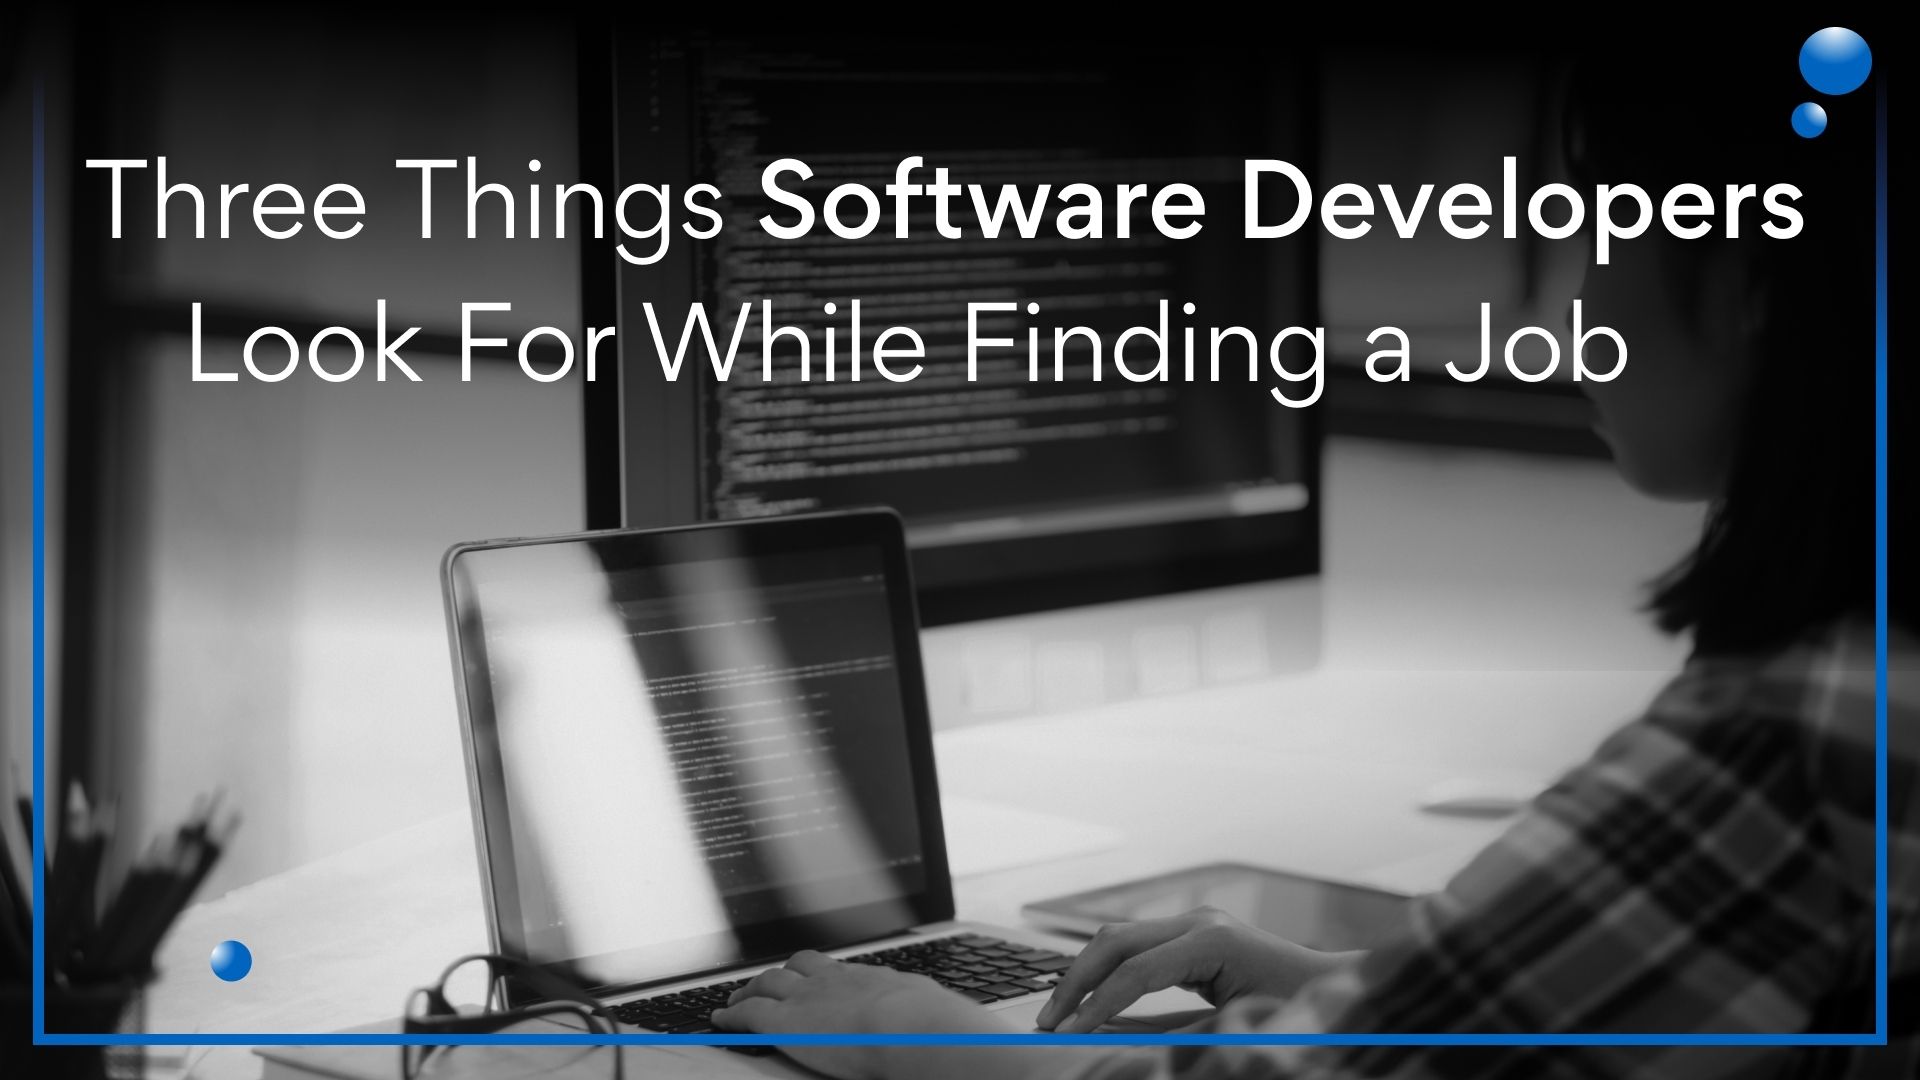 3 Things Software Developers Look For in New Jobs